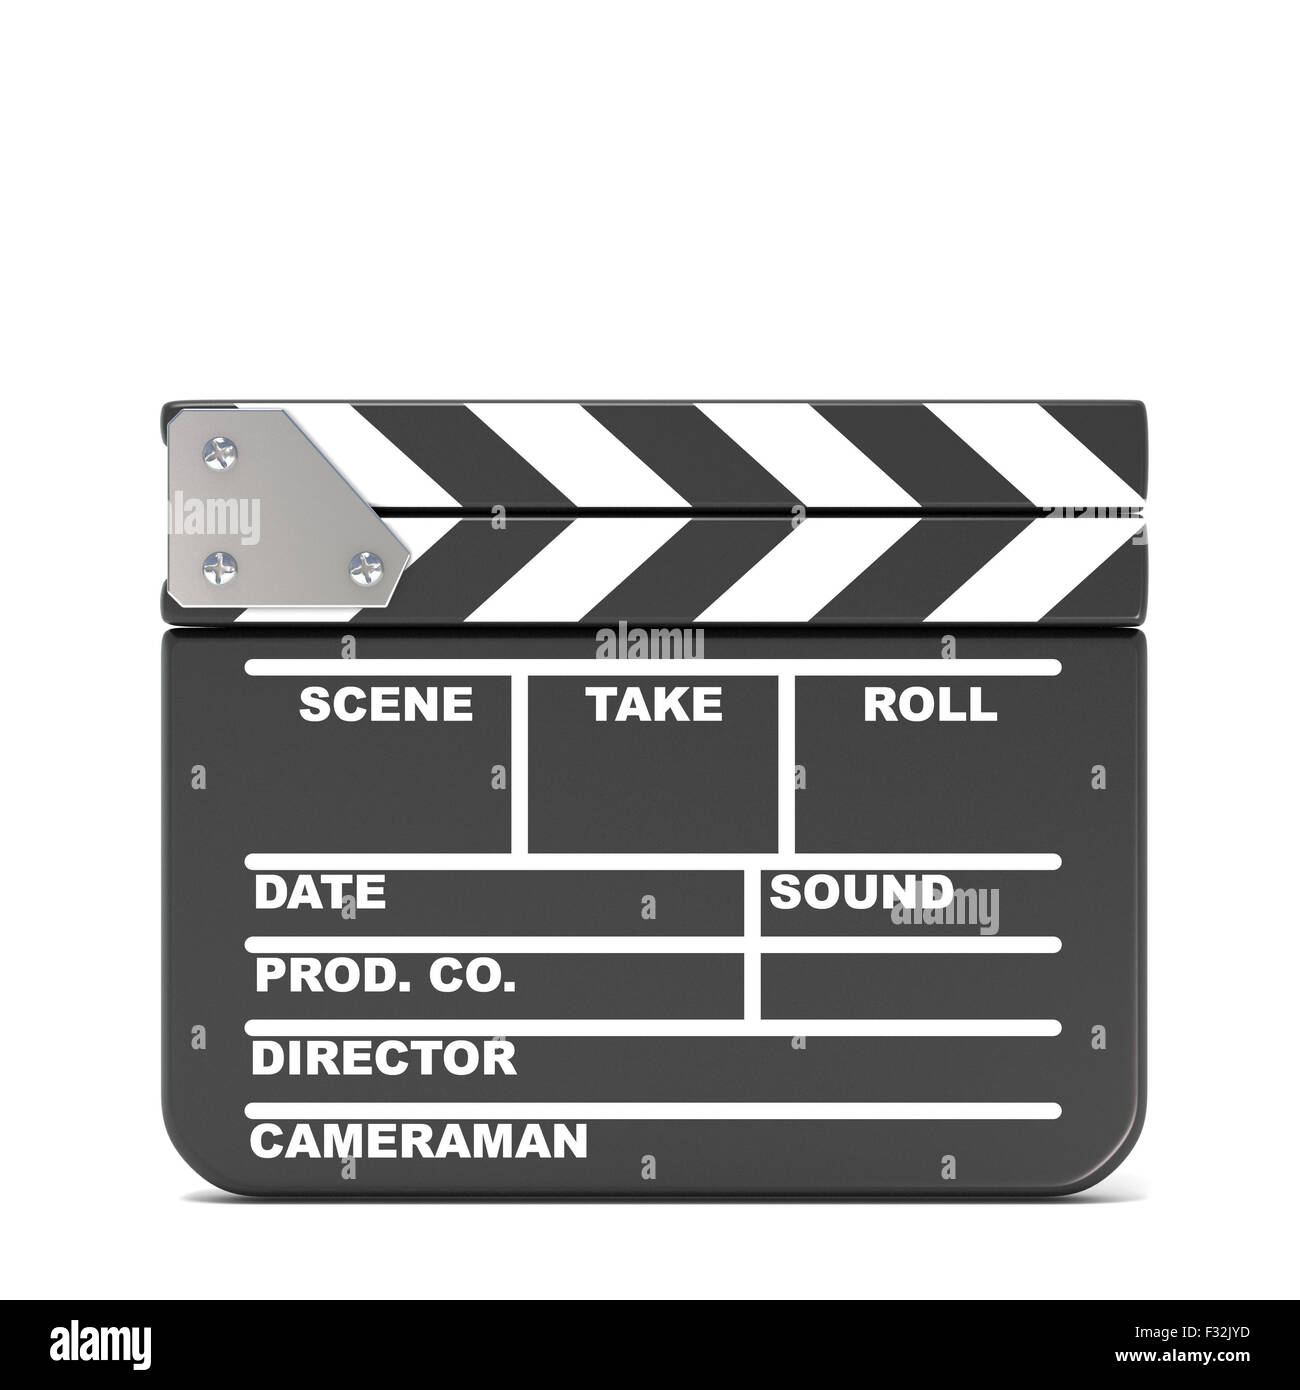 Movie clapperboard, closed. 3D render illustration isolated on white background Stock Photo